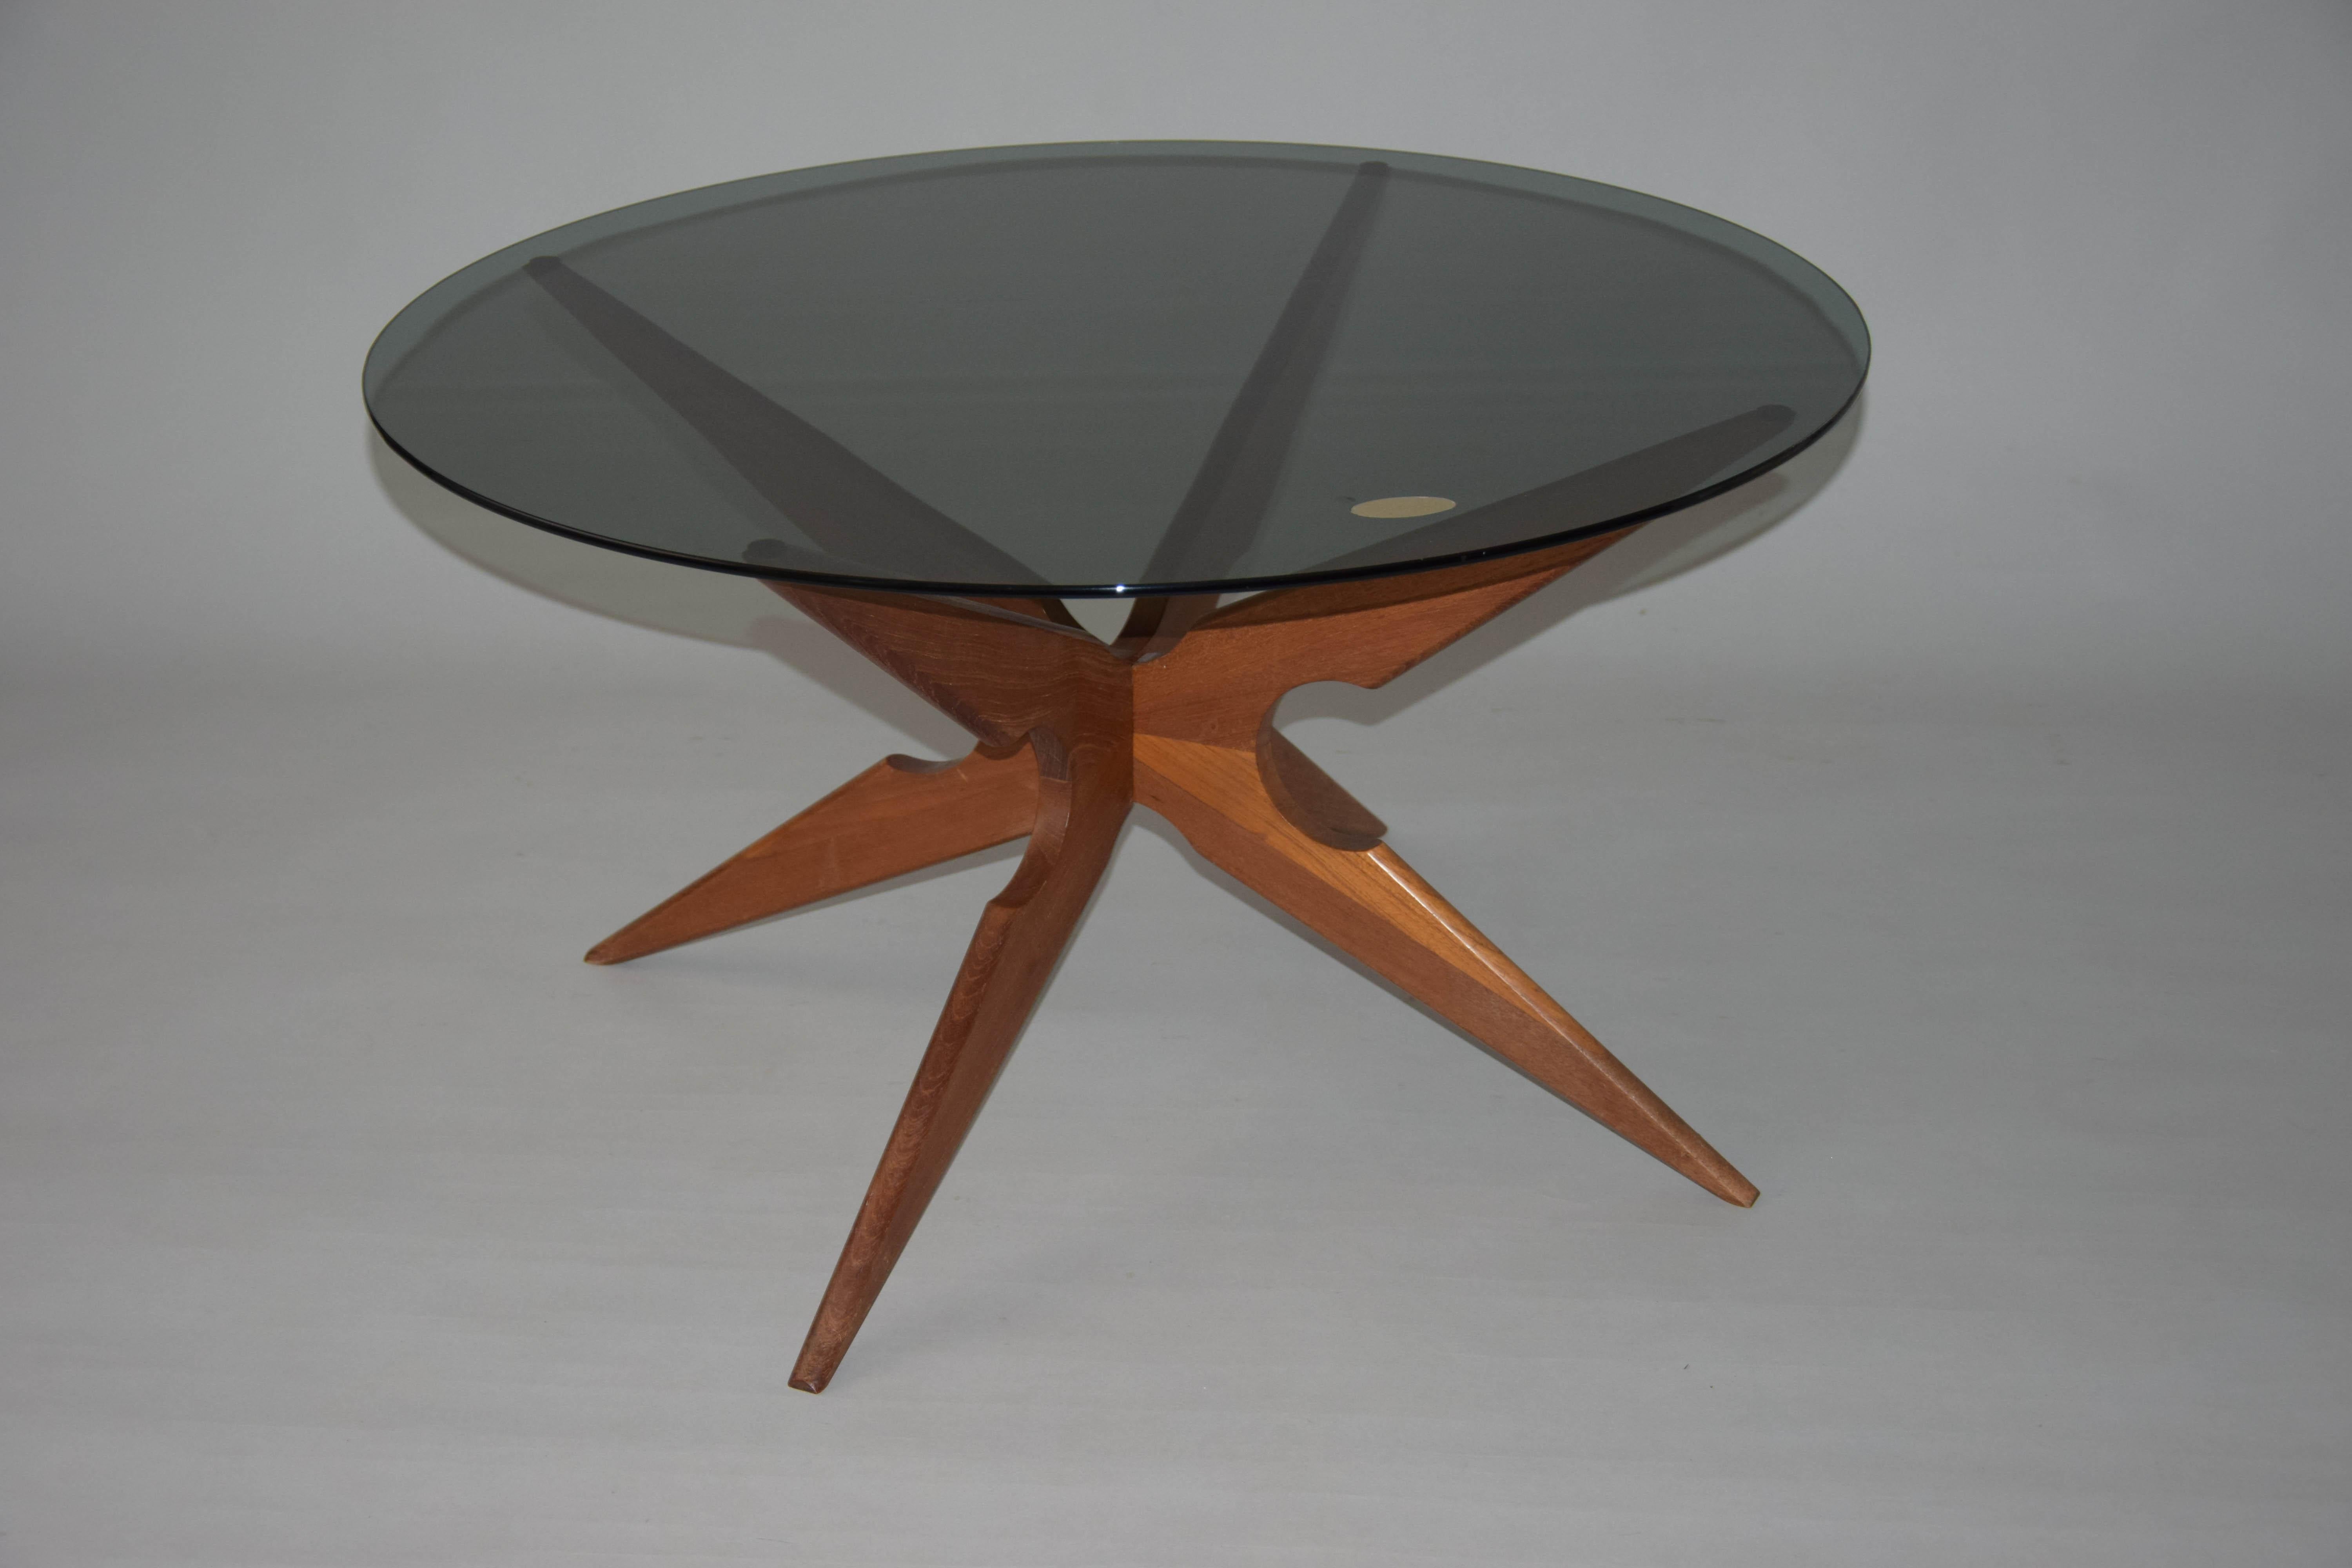 Retro design coffee table attributed to Vladimír Kagan, made in Belgium, 1960s, wooden legs, smoked glass, original Mobler paper label.
 